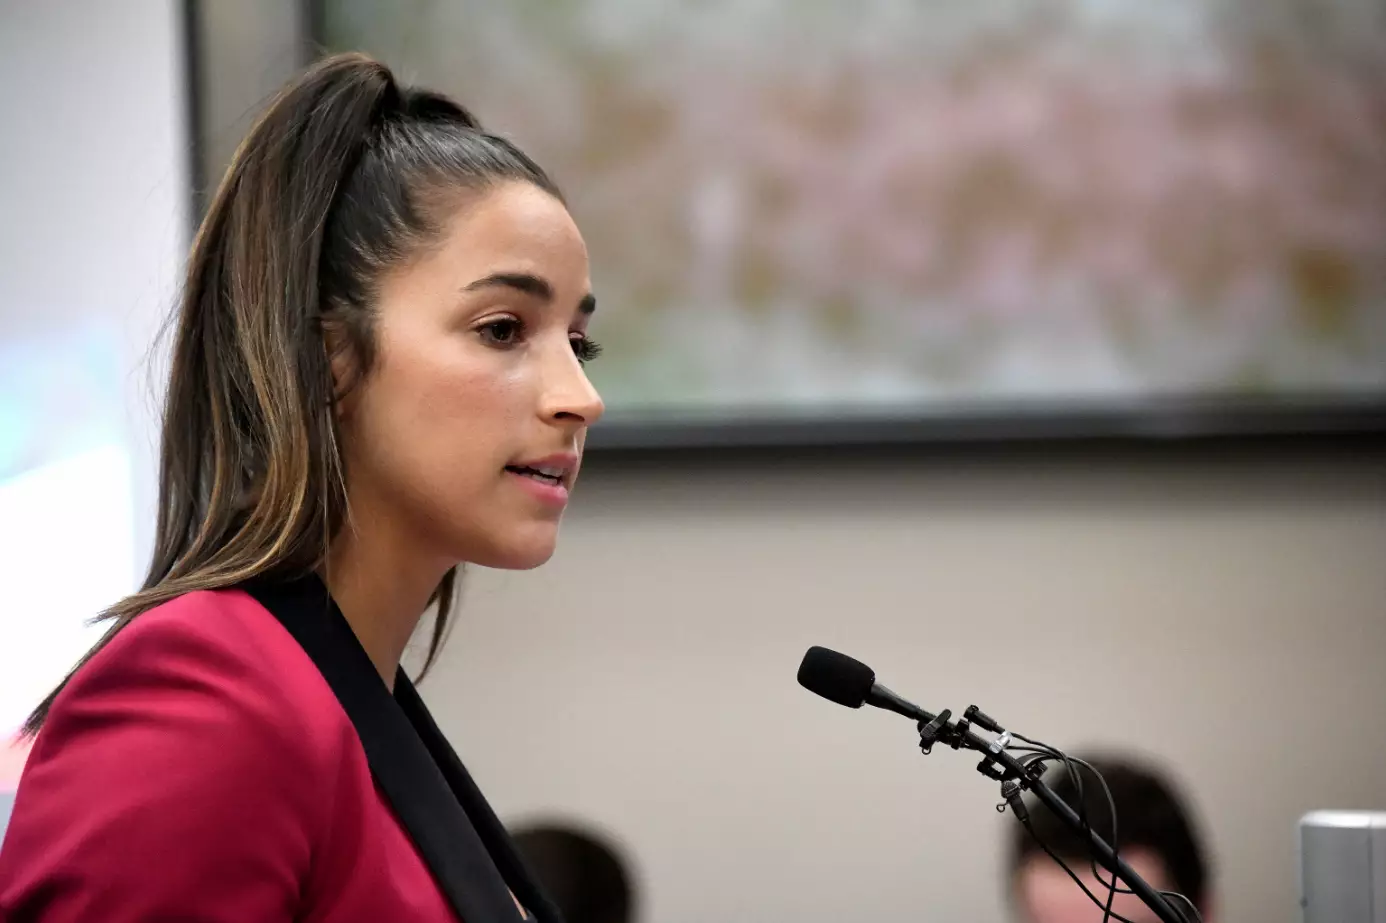 Gymnast ​Aly Raisman Powerfully Tells Larry Nassar 'You Are Nothing' In Court